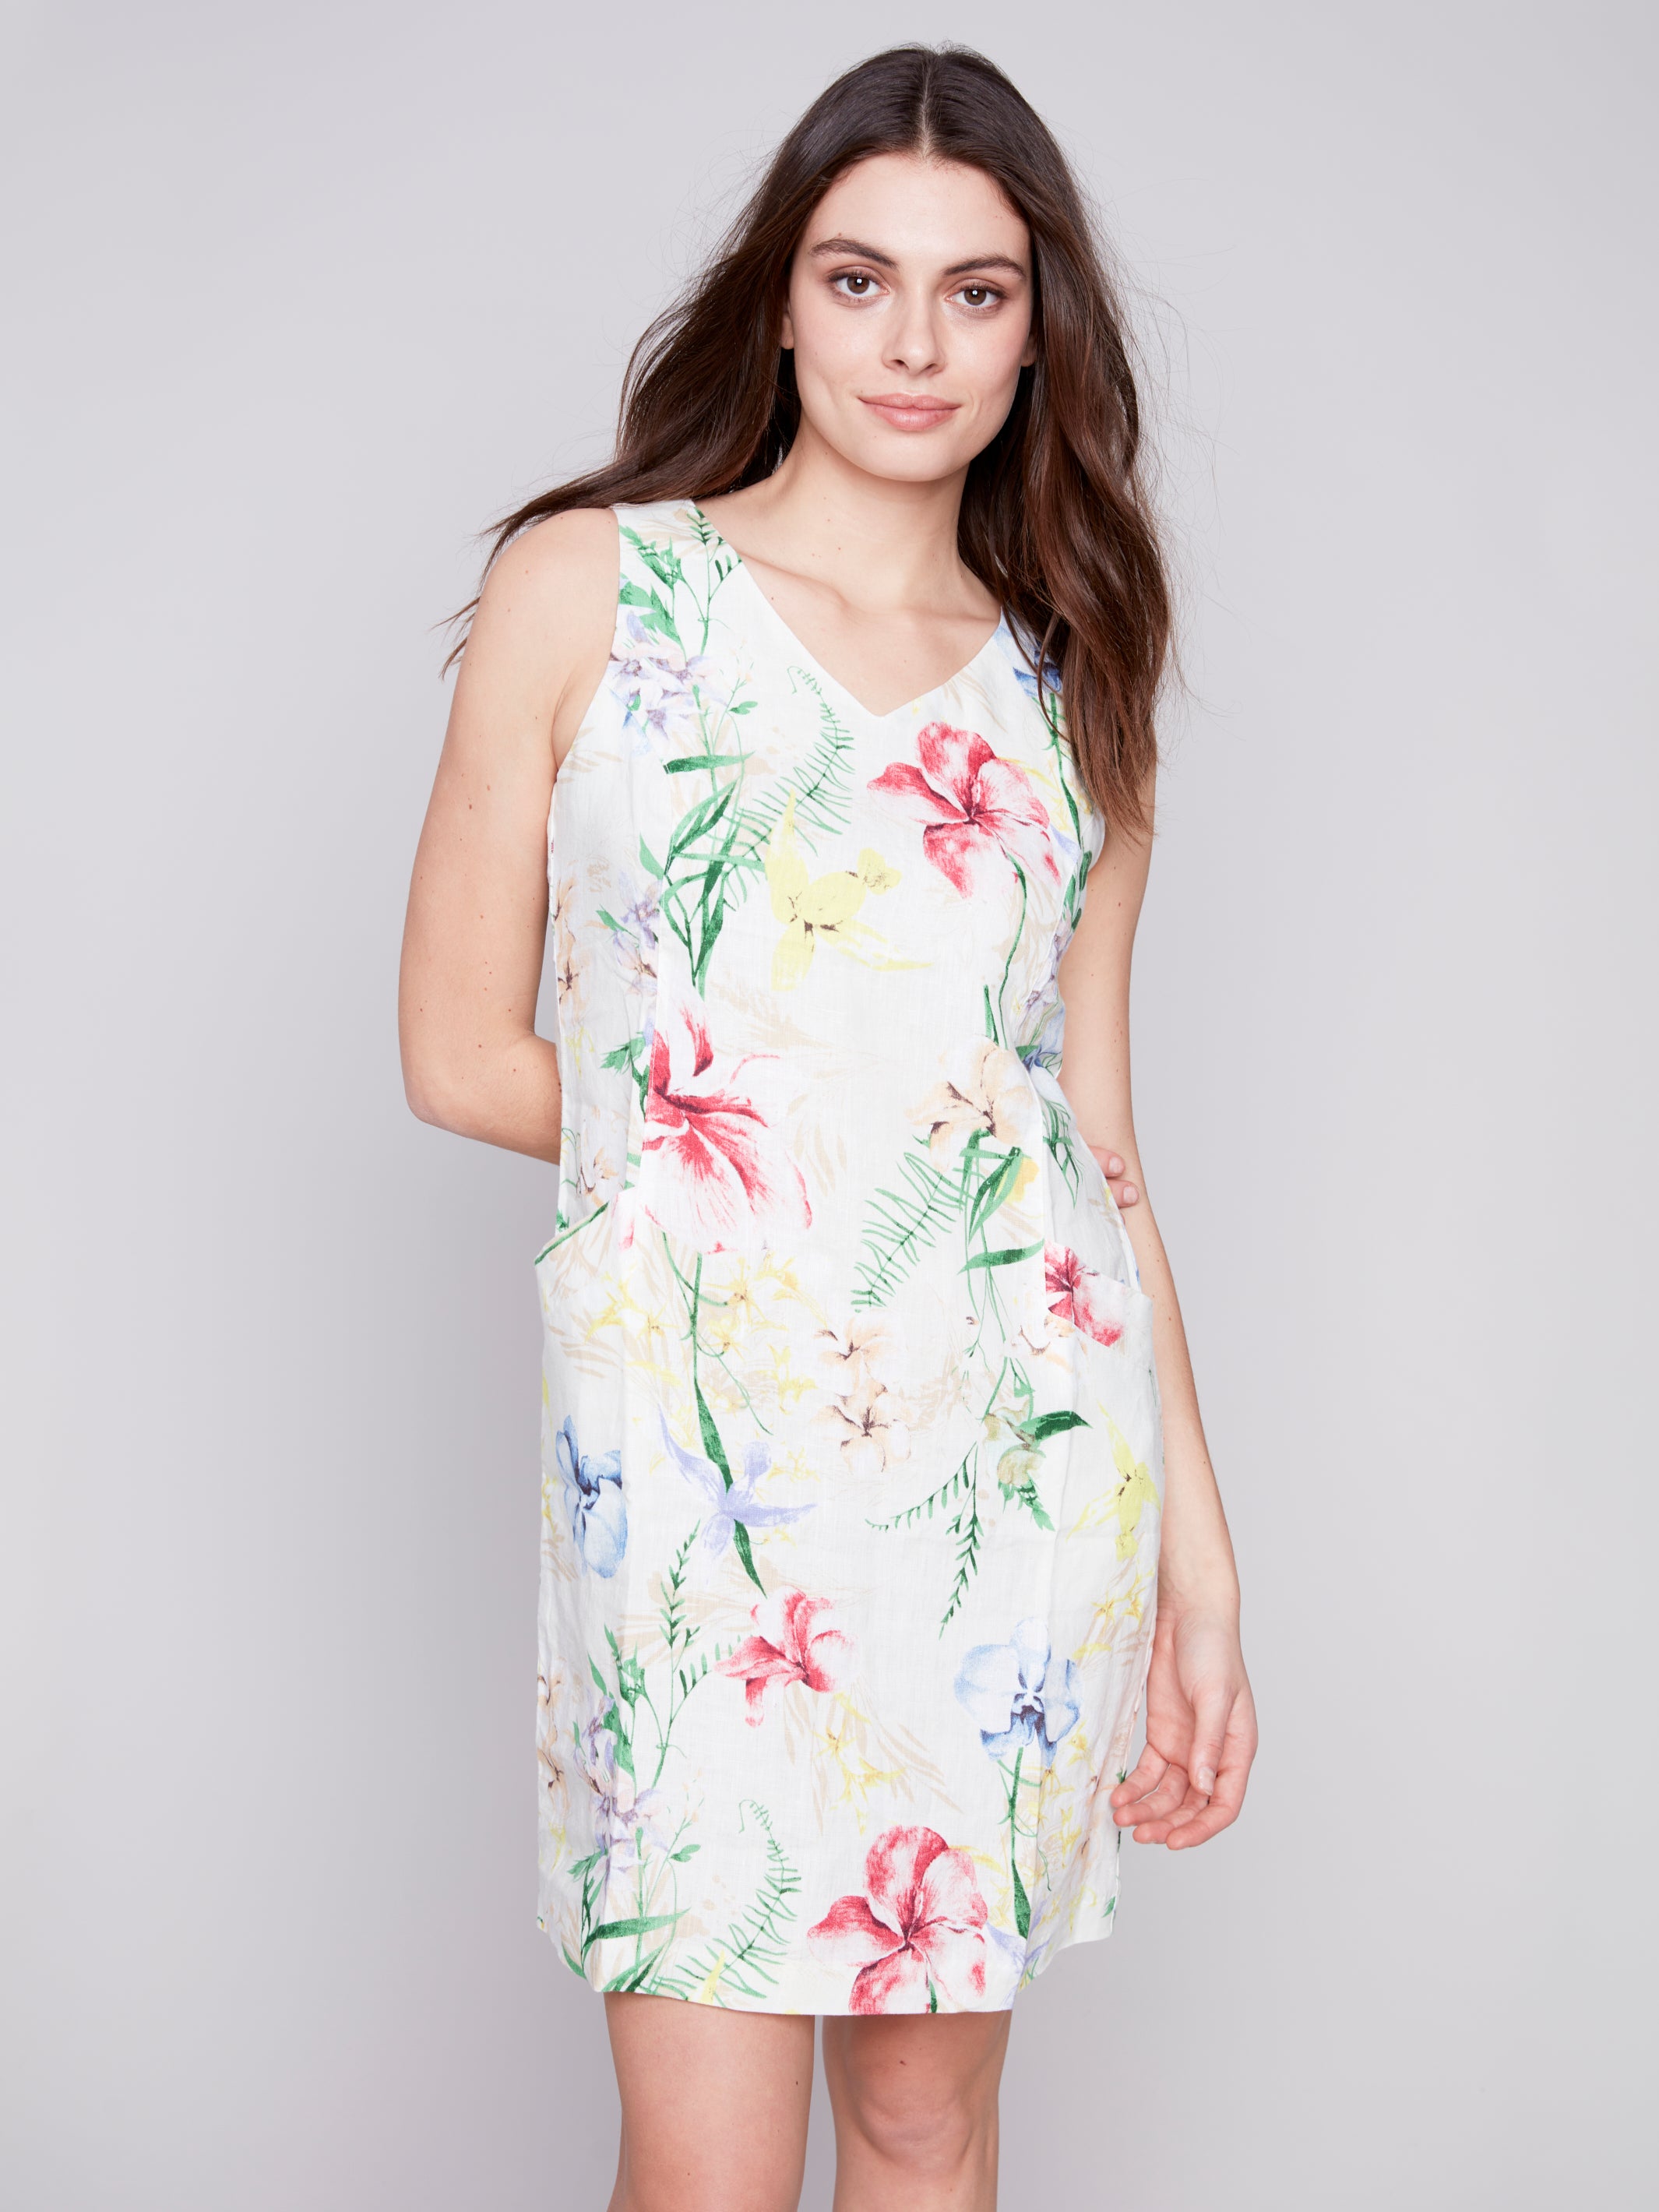 Printed Sleeveless Dress With Coconut Buttons C3115PX-032B